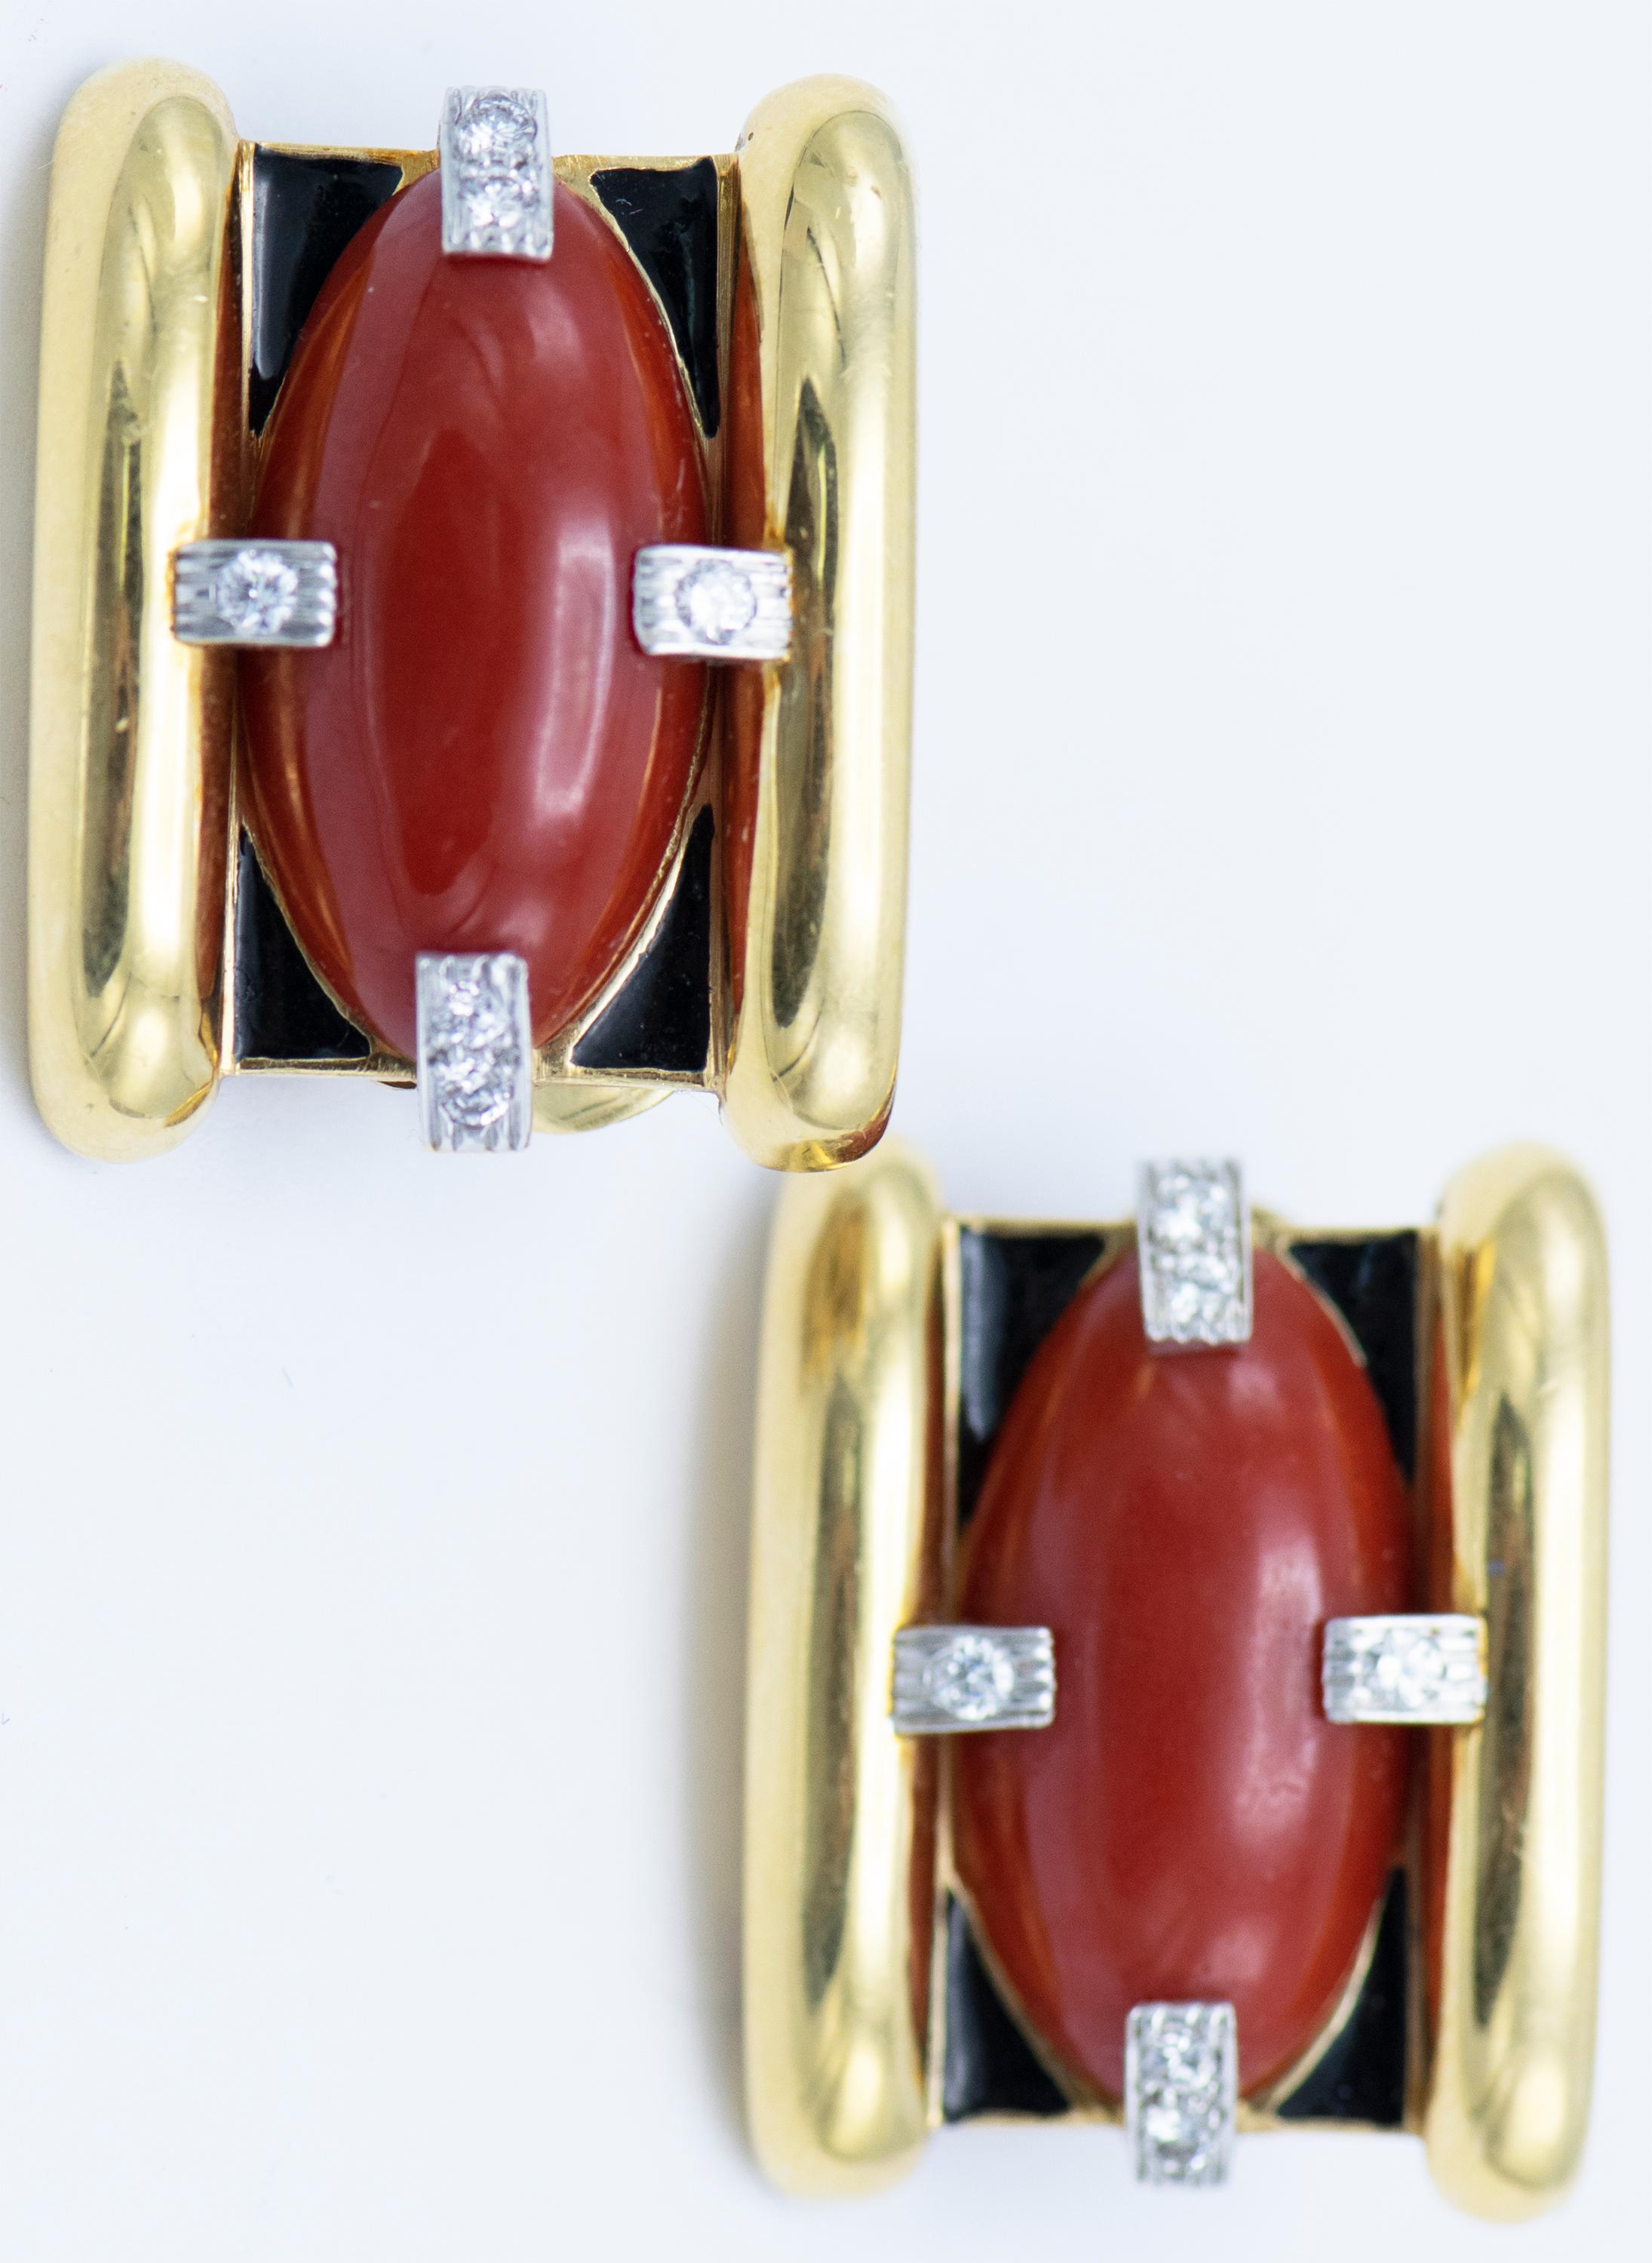 A Pair of 18 Karat Yellow Gold, Platinum, Coral, Diamond and Enamel Earclips, David Webb,containing two navette shape cabochon cut orangey red coral each measuring approximately 21.23 x 11.56 mm, and 12 round brilliant cut diamonds weighing